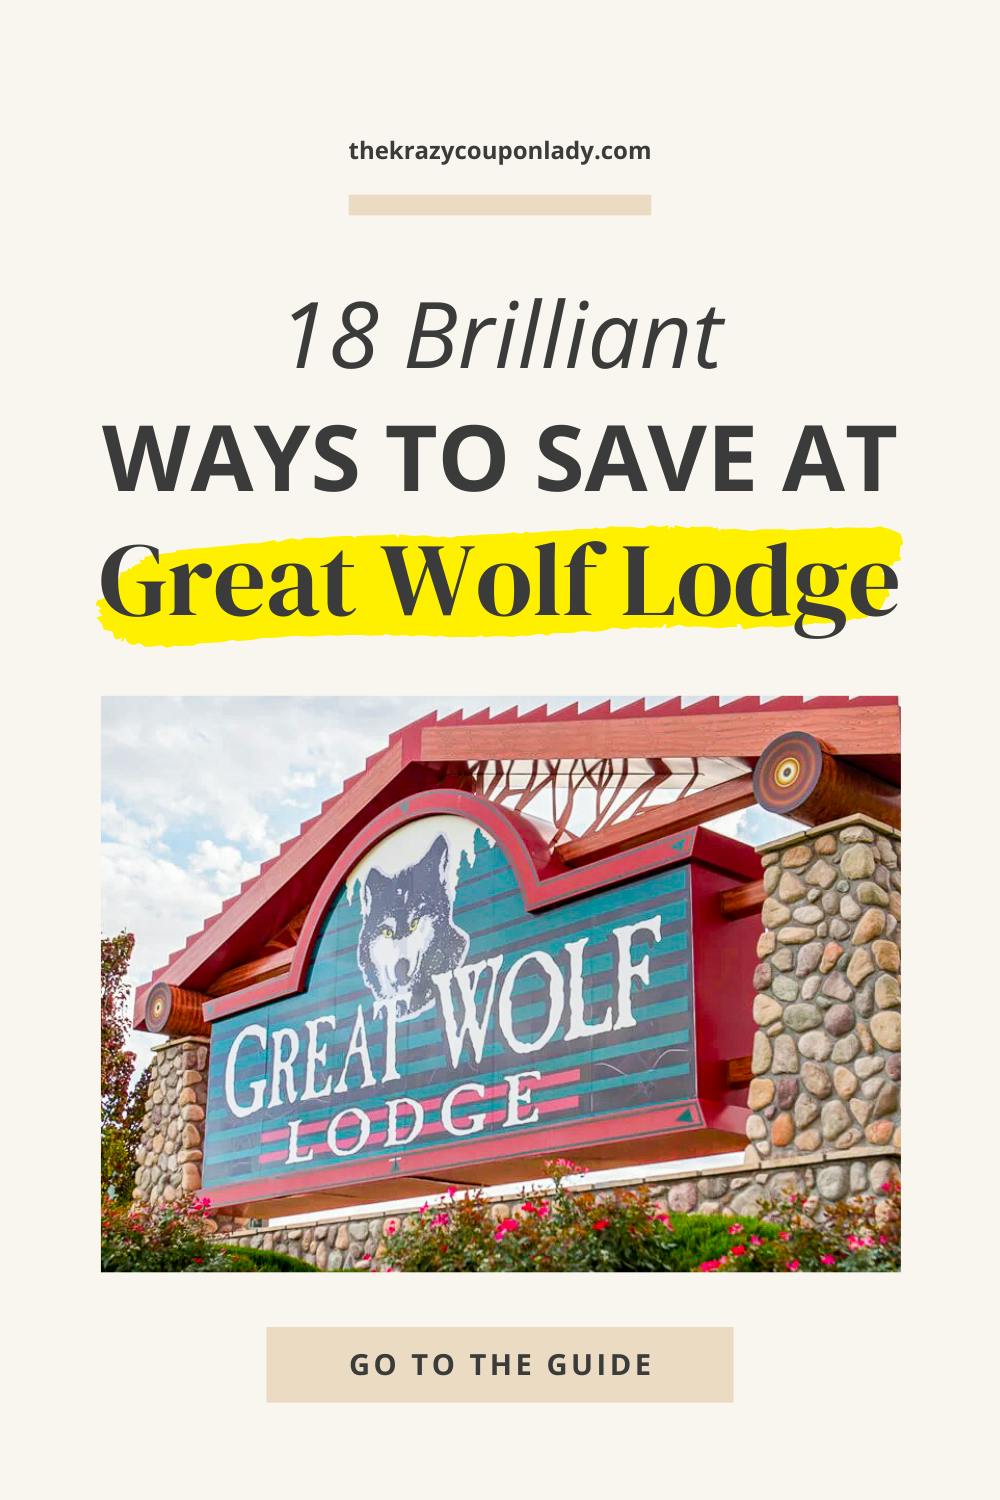 21 Ways to Save at Great Wolf Lodge — Including a $99/Night Groupon Deal Offered Now!